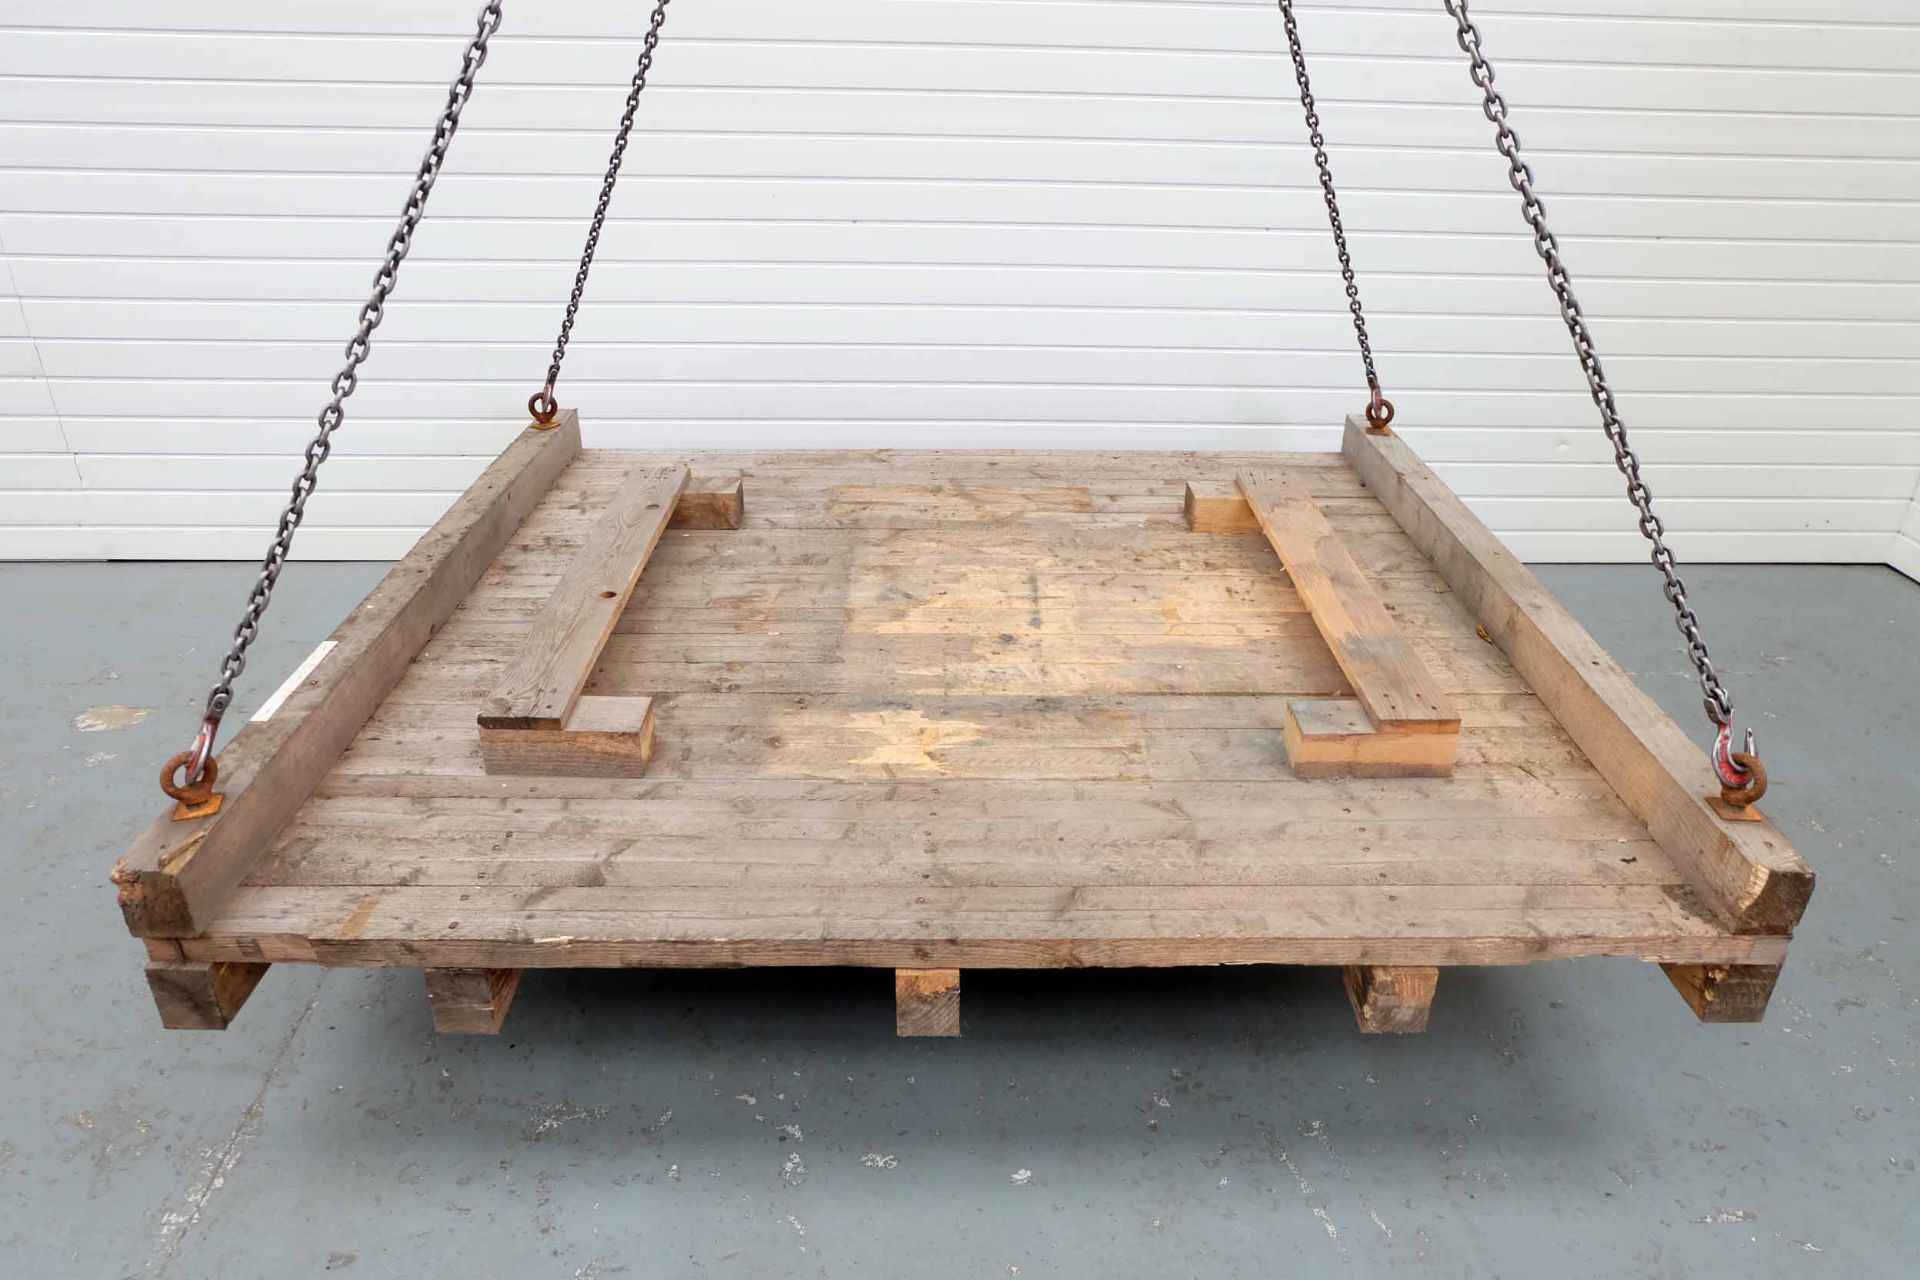 Heavy Duty Wooden Pallet With Four Eye Bolts. Size 1950mm x 1750mm. Made in Germany. (4 Leg Chains N